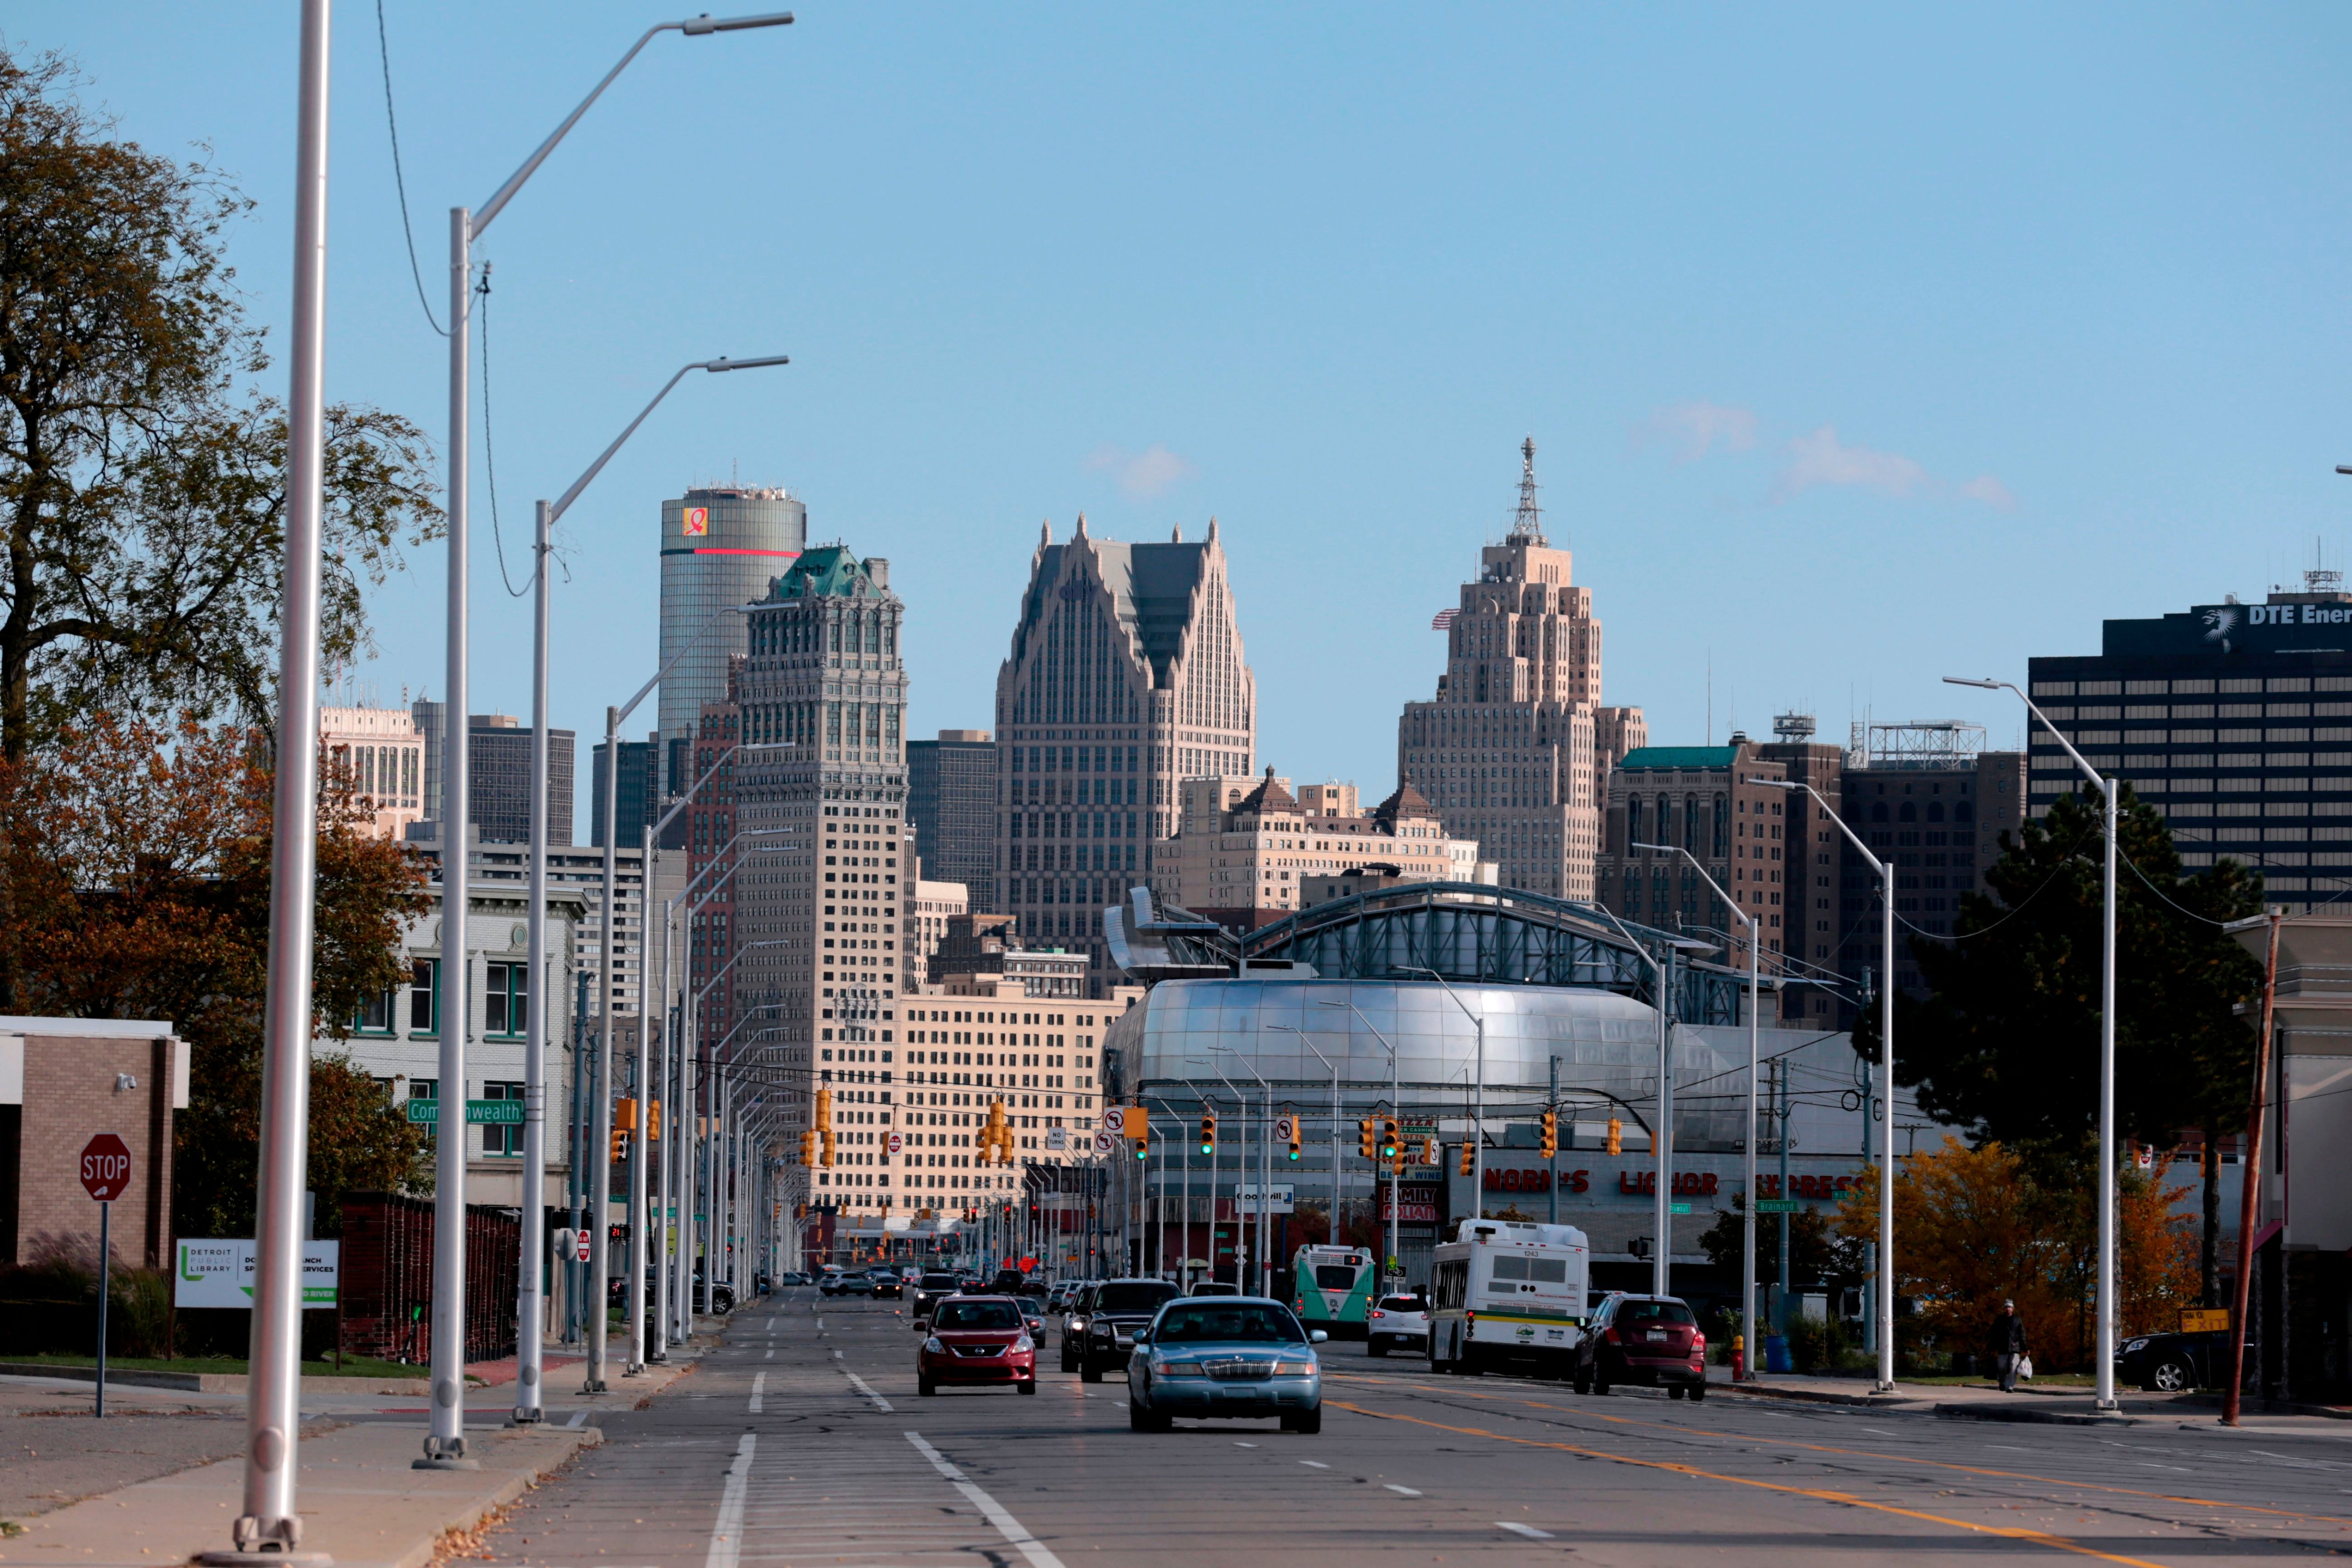 The Detroit, Mich., skyline is seen from Grand River Avenue on October 23, 2019. A new study says Detroit is the most segregated metropolitan area in the U.S. (Jeff Kowalsky—AFP/Getty Images)